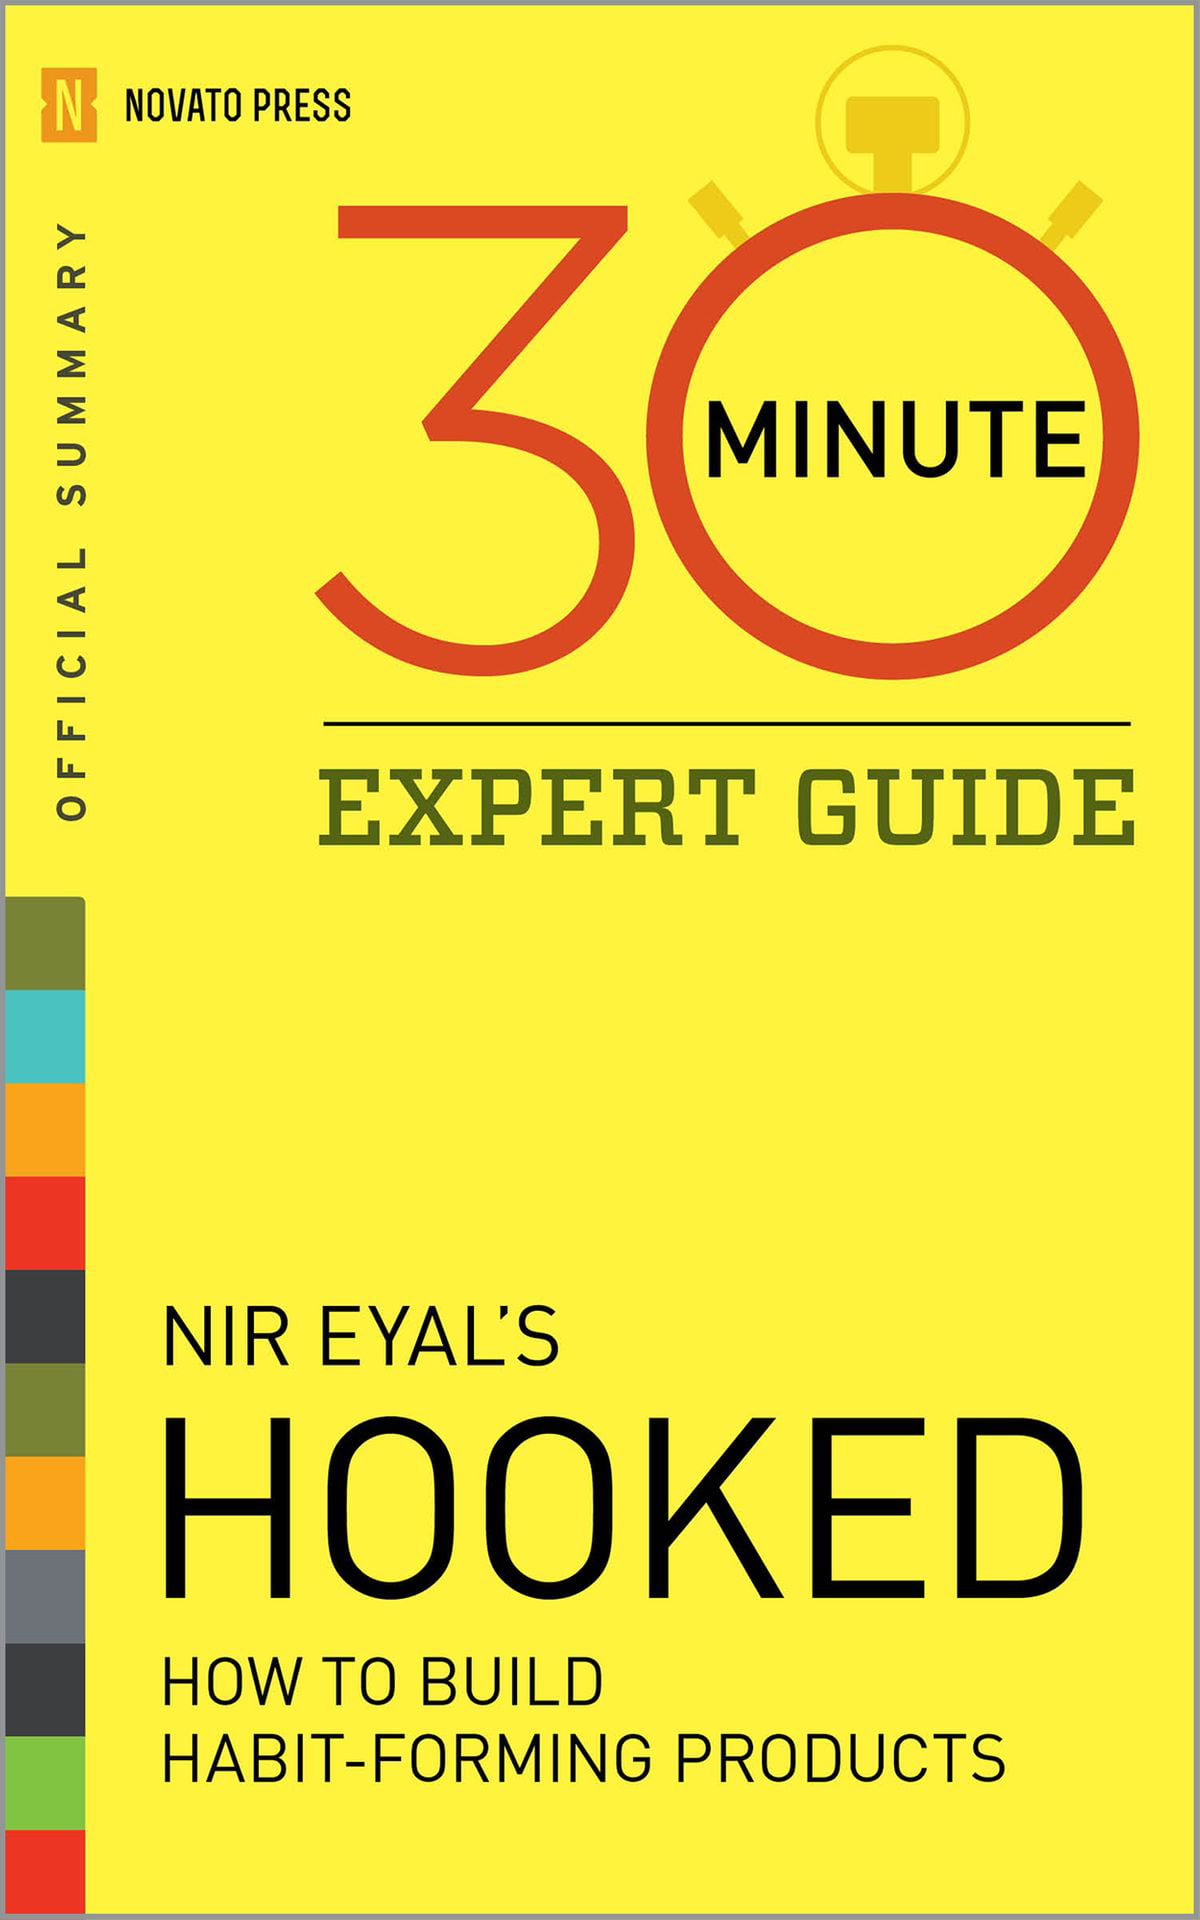 Hooked 30 Minute Expert Guide Official Summary to Nir Eyal’s Hooked eBook